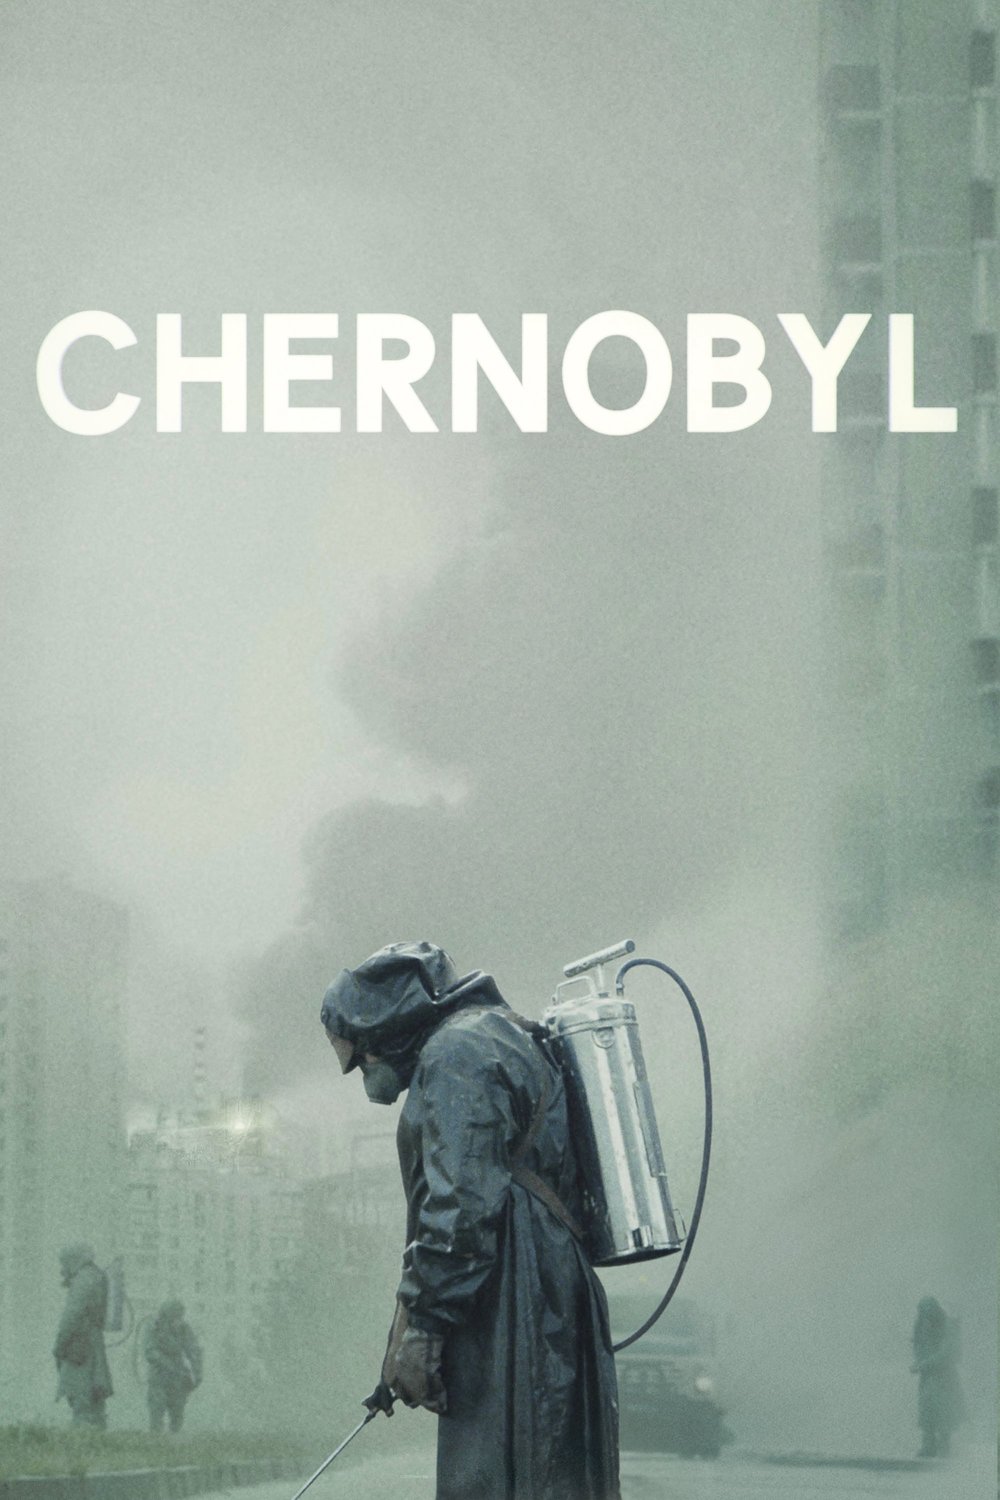 Poster of the movie Chernobyl